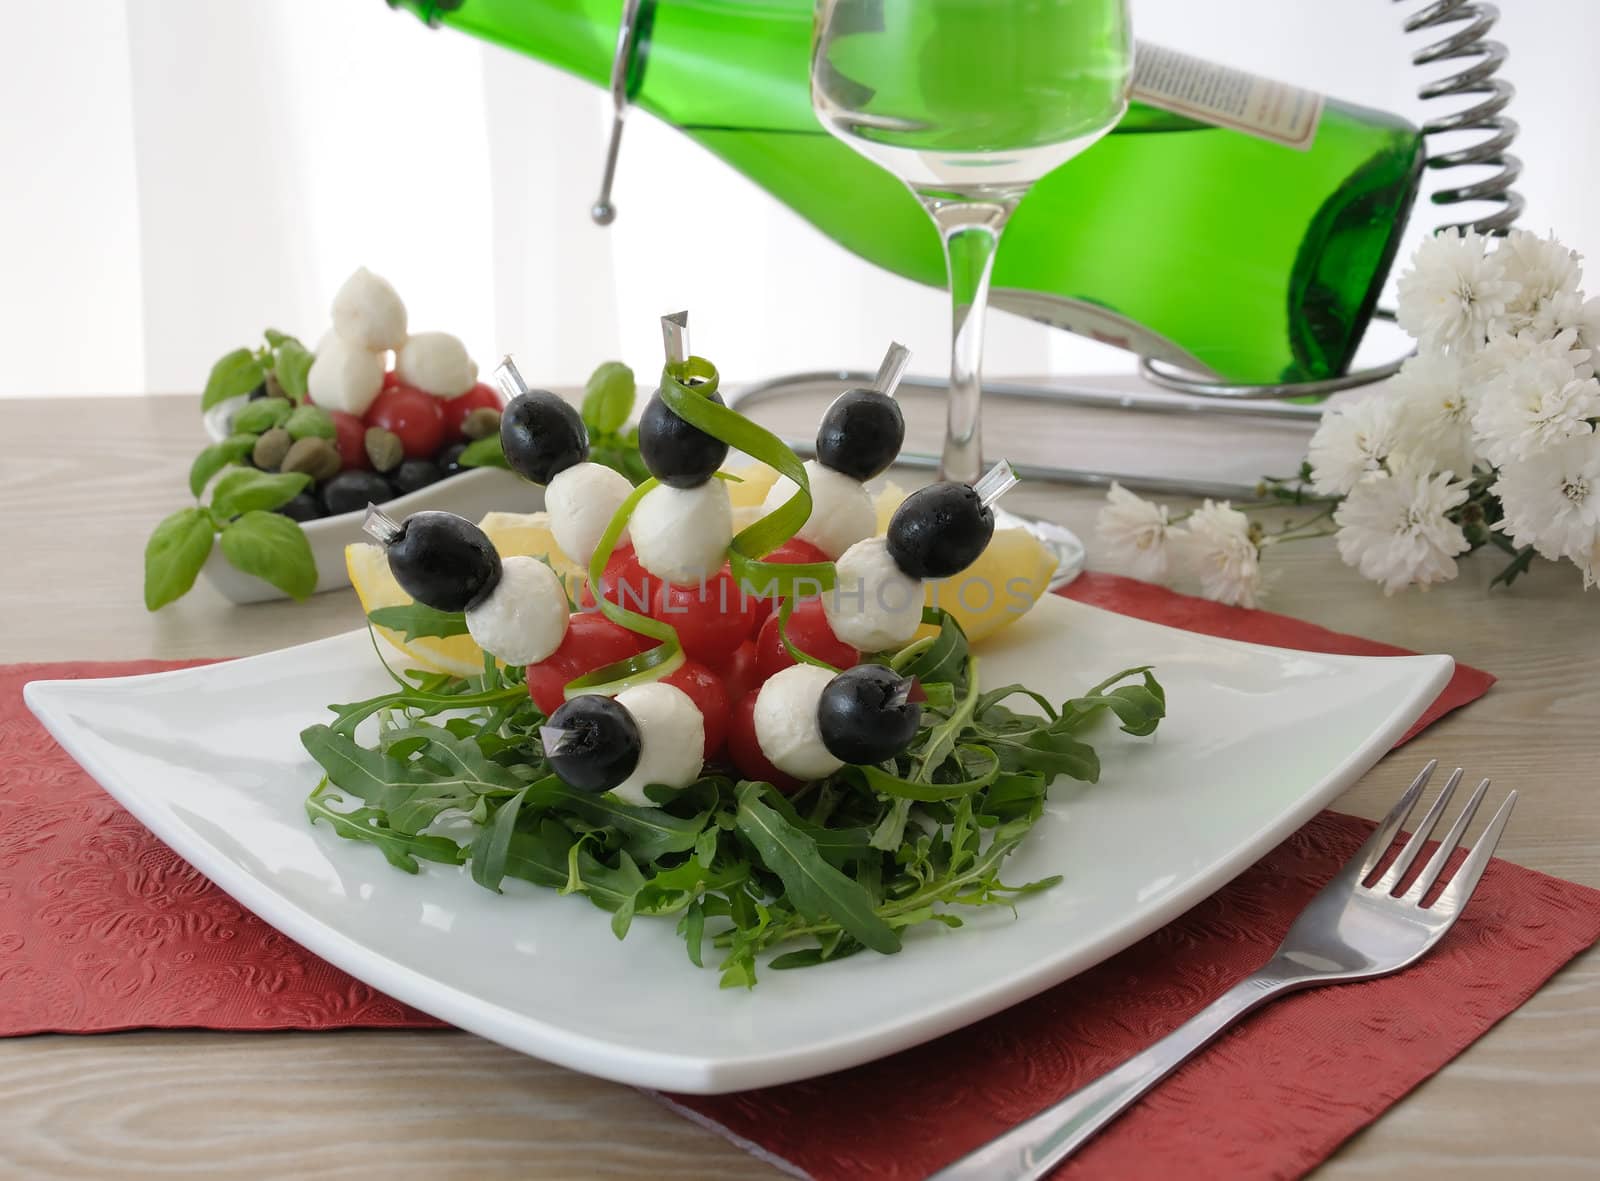 Appetizer of mozzarella, cherry tomatoes and olives with Arugula by Apolonia